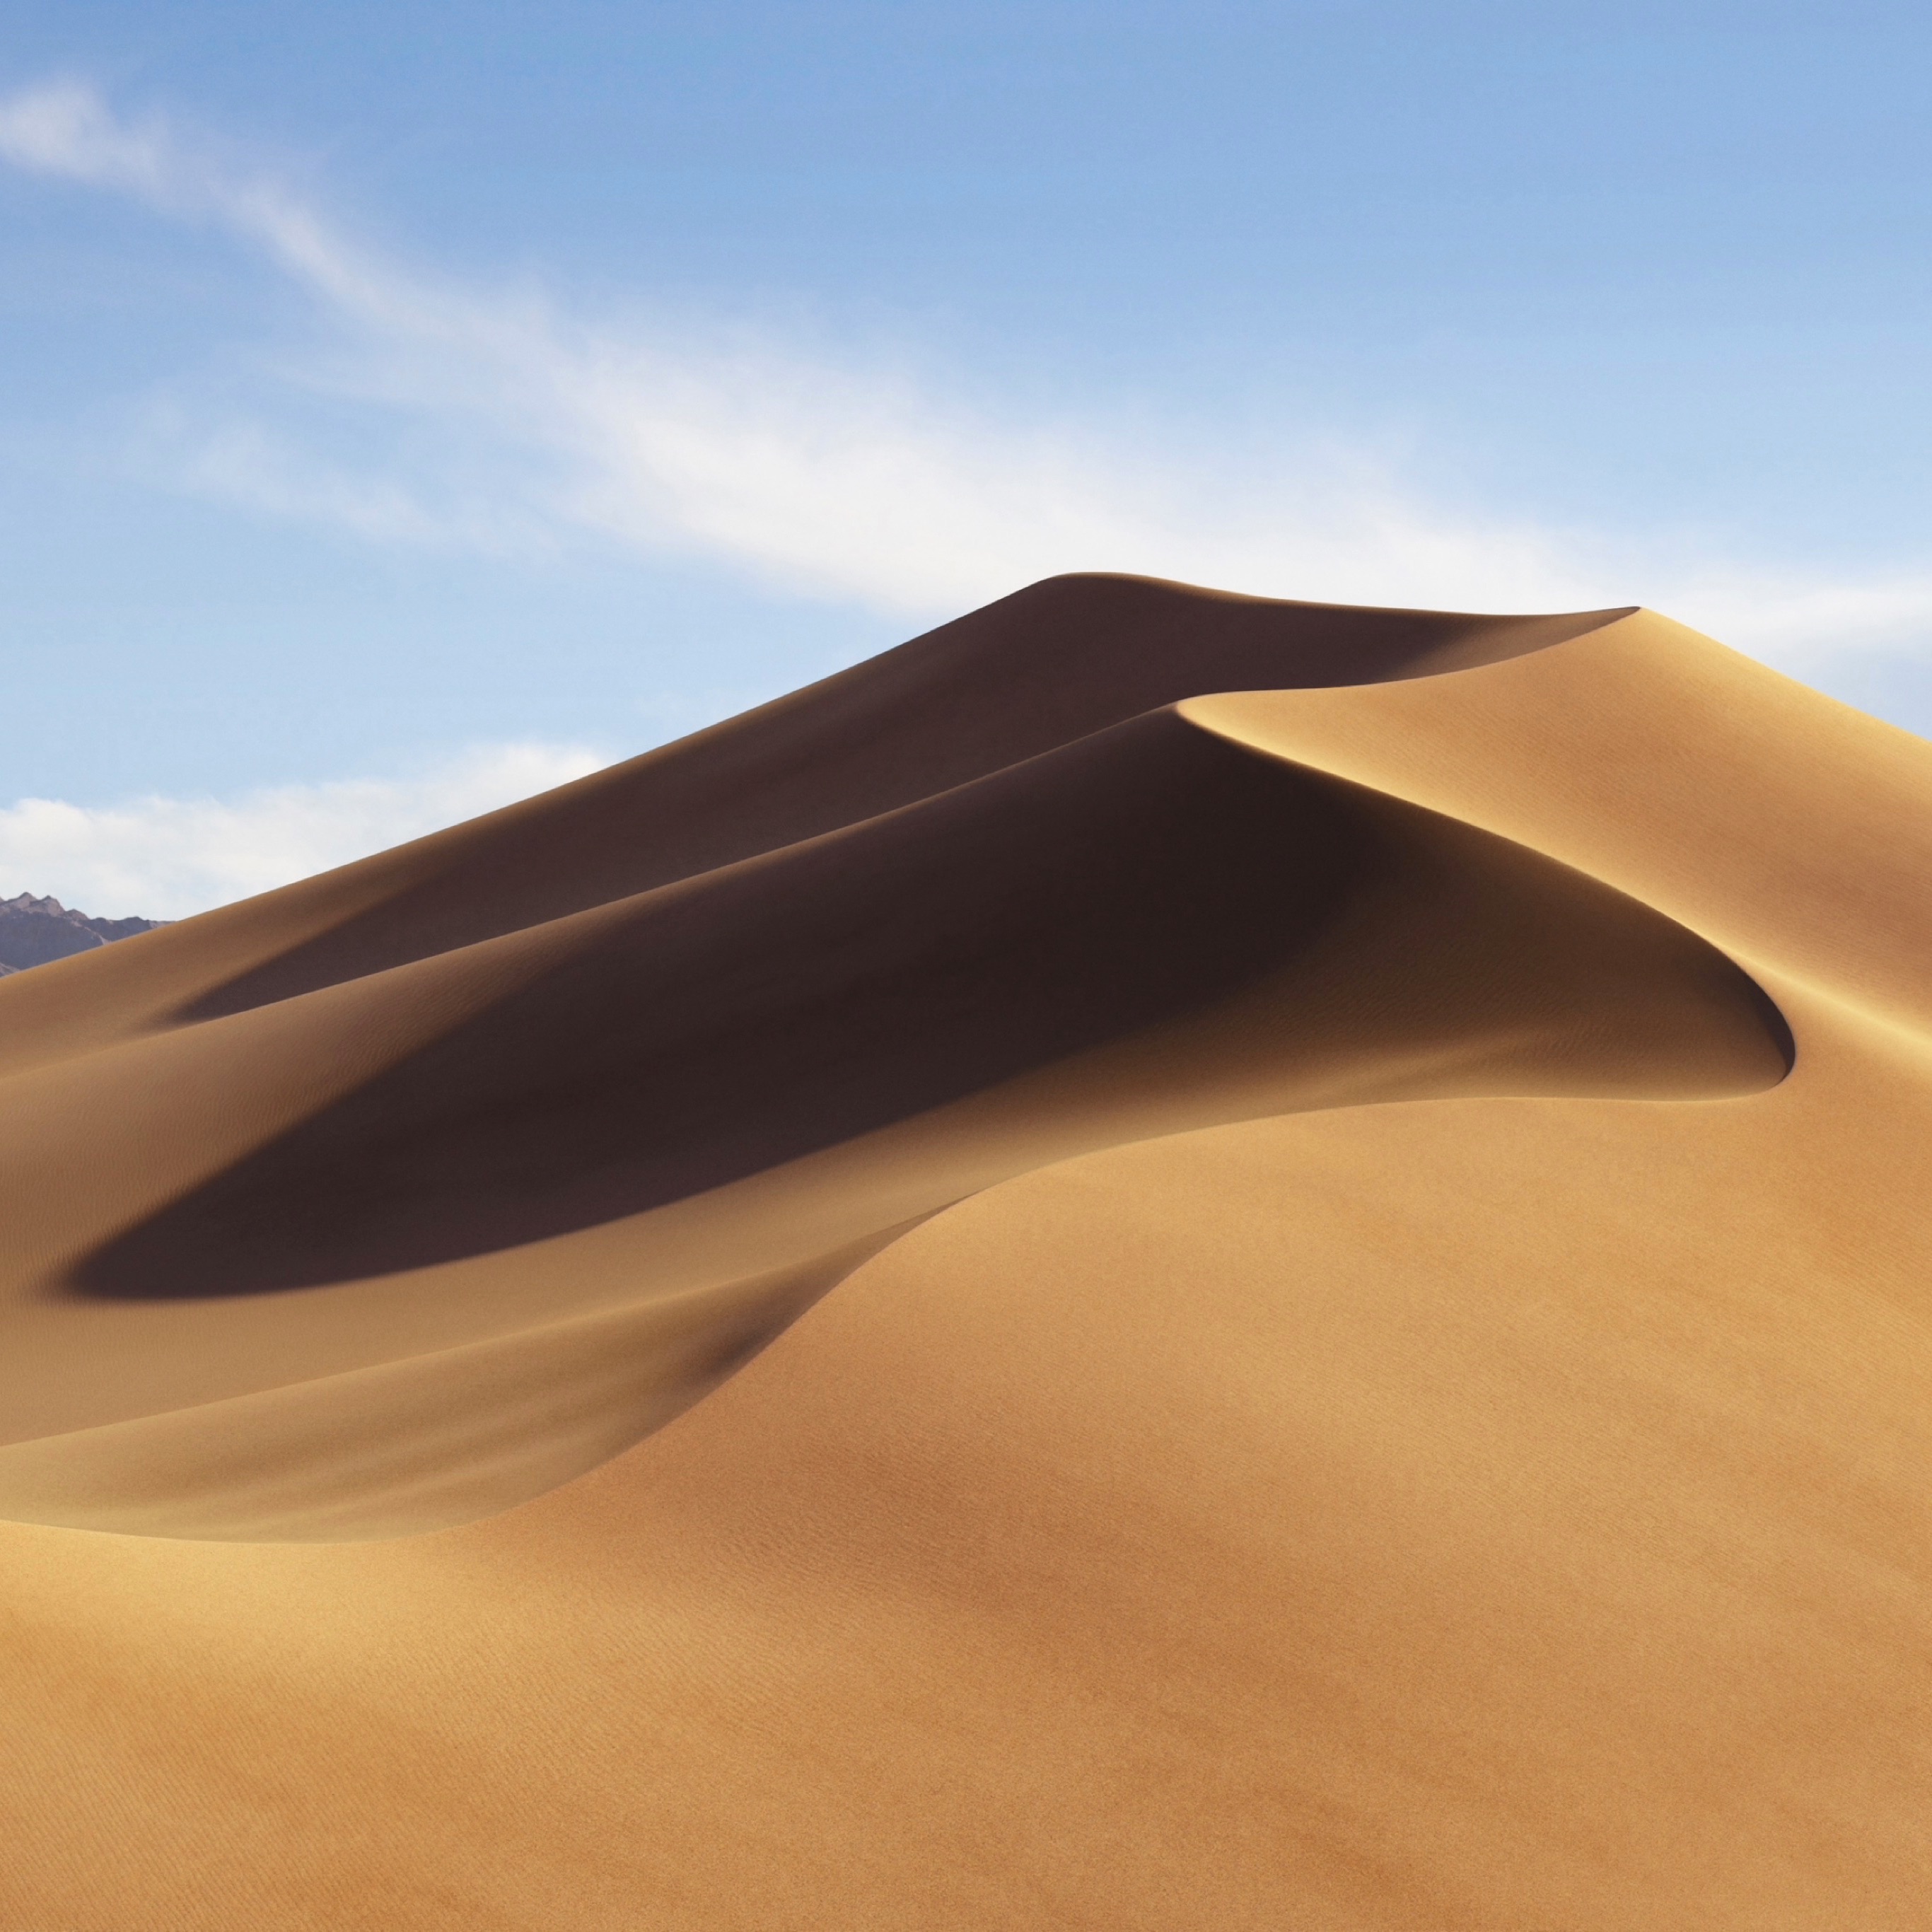 Wallpaper Weekends Macos Mojave Wallpapers For Iphone Ipad And Apple Watch